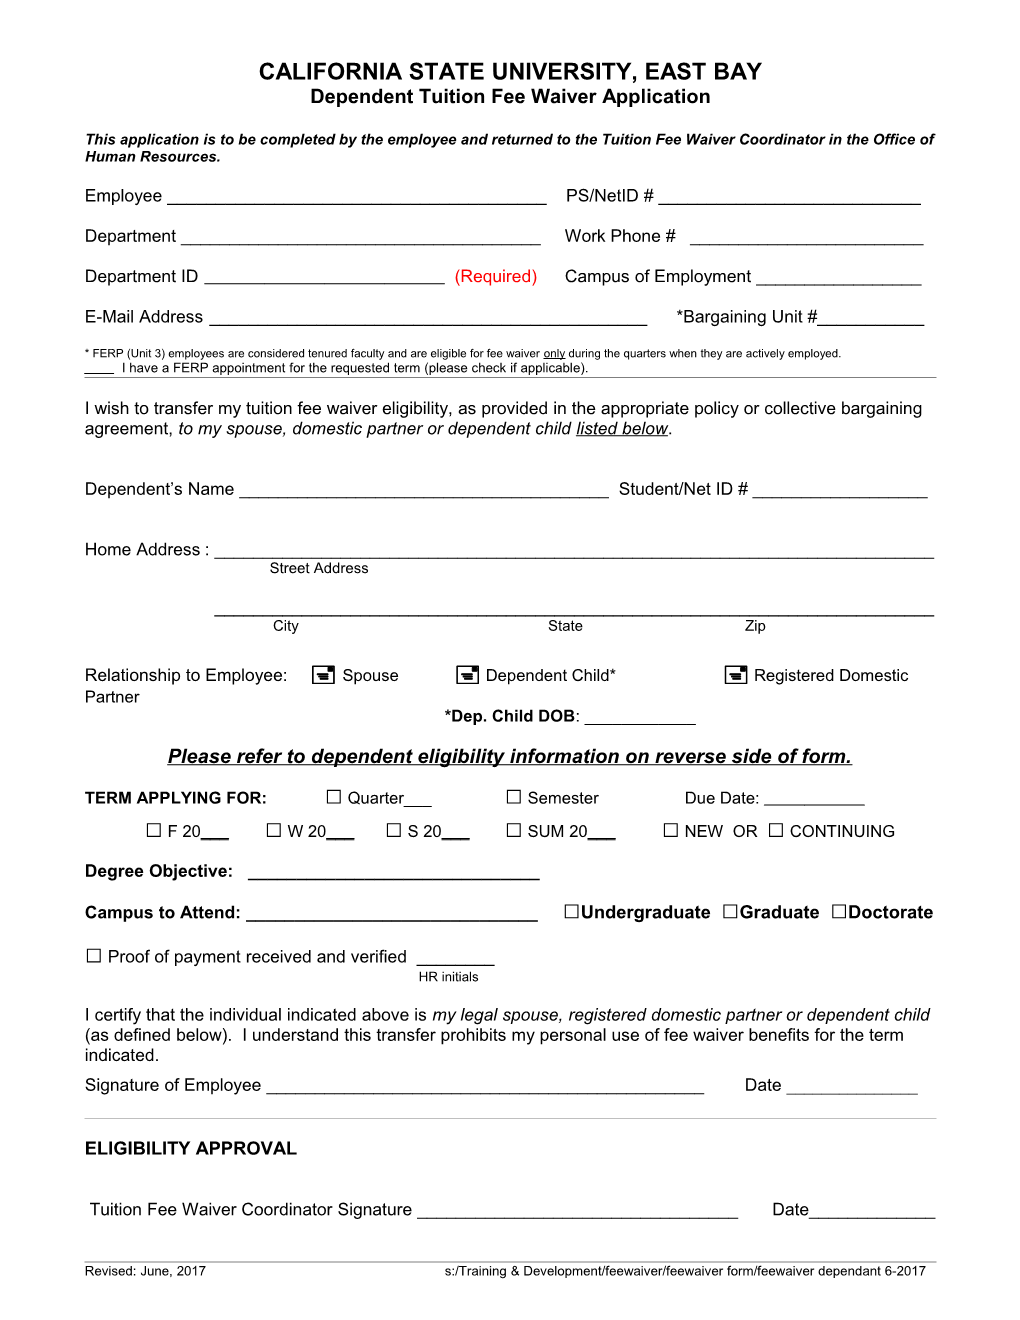 Fee Waiver for Spouse/Domestic Partner/Dependent Child